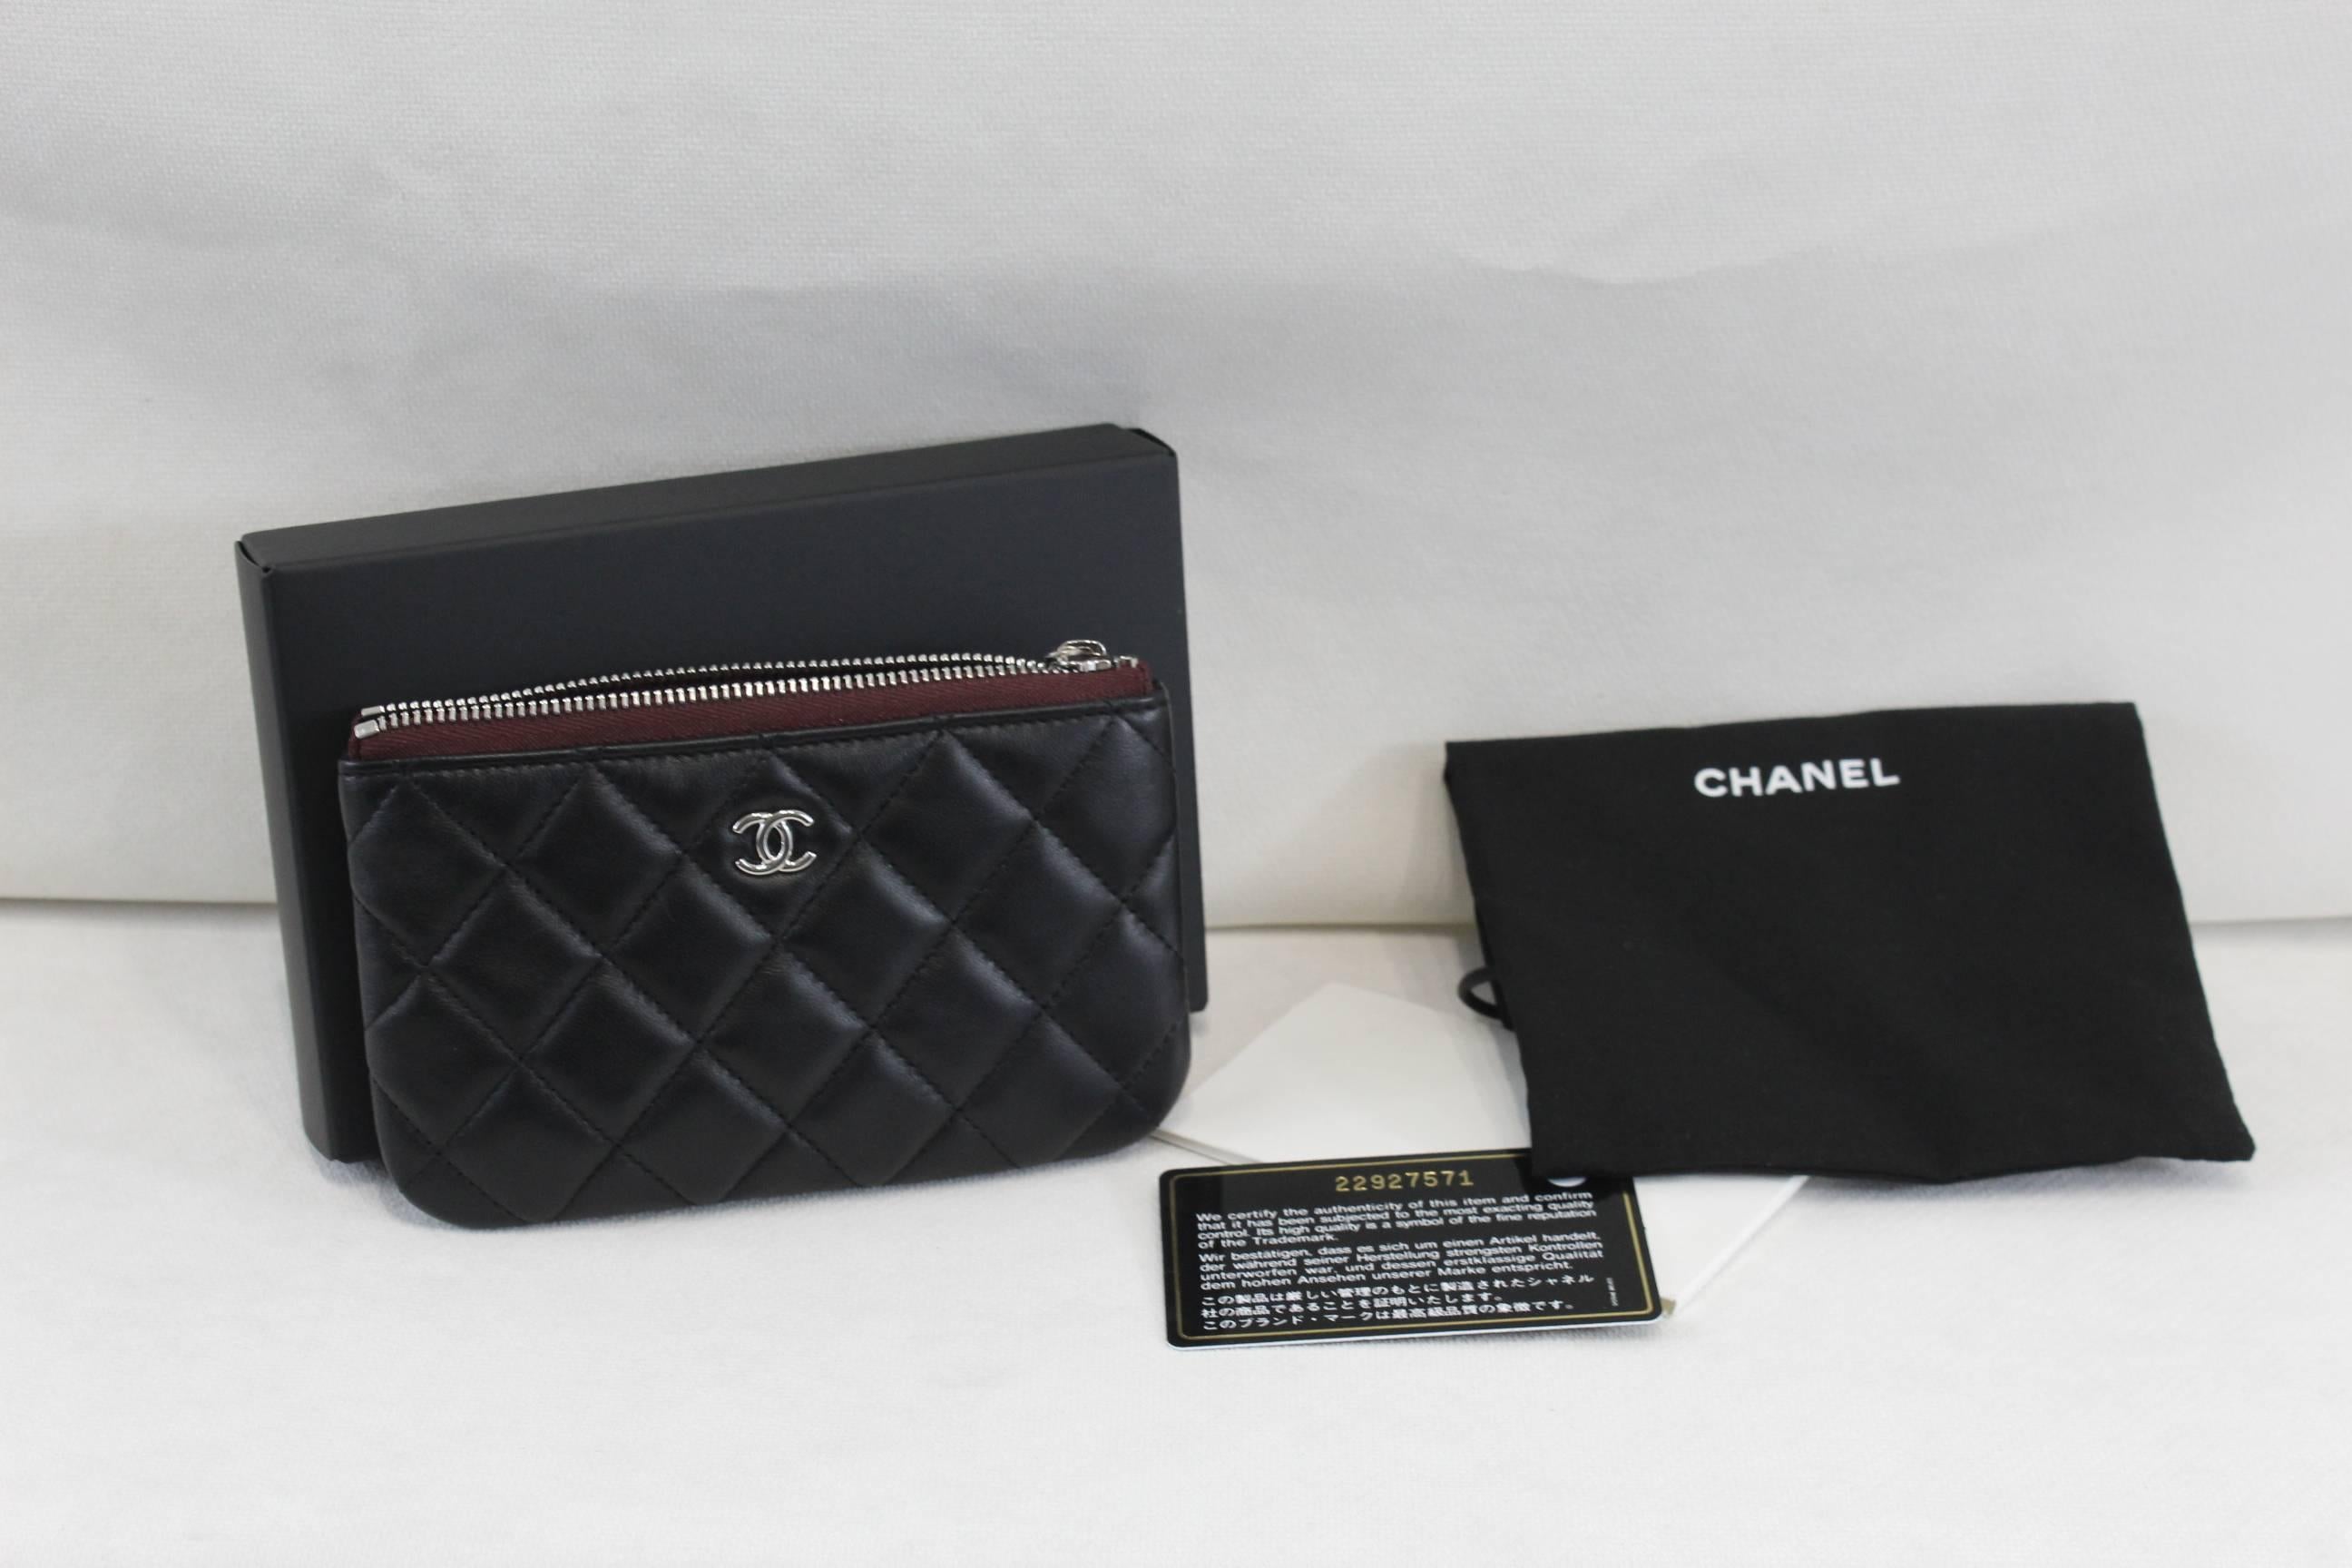 New never used nice leather Chanel coin purse / cardholder
Full set

